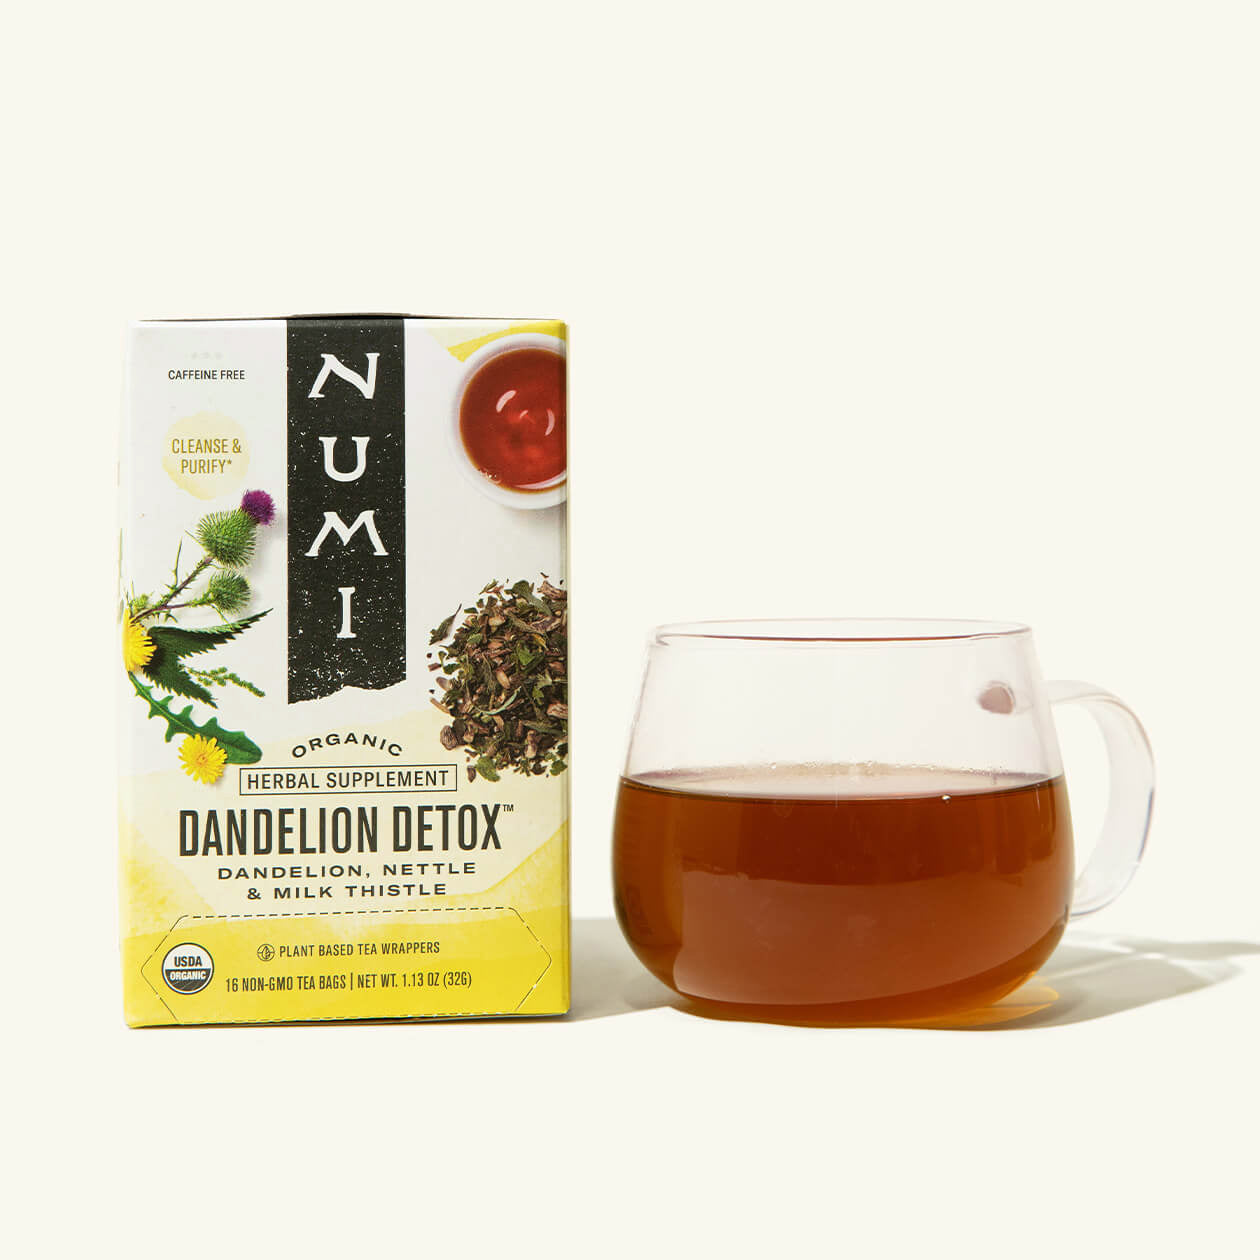 A box of Numi's Dandelion Detox next to a brewed cup of tea in a clear cup